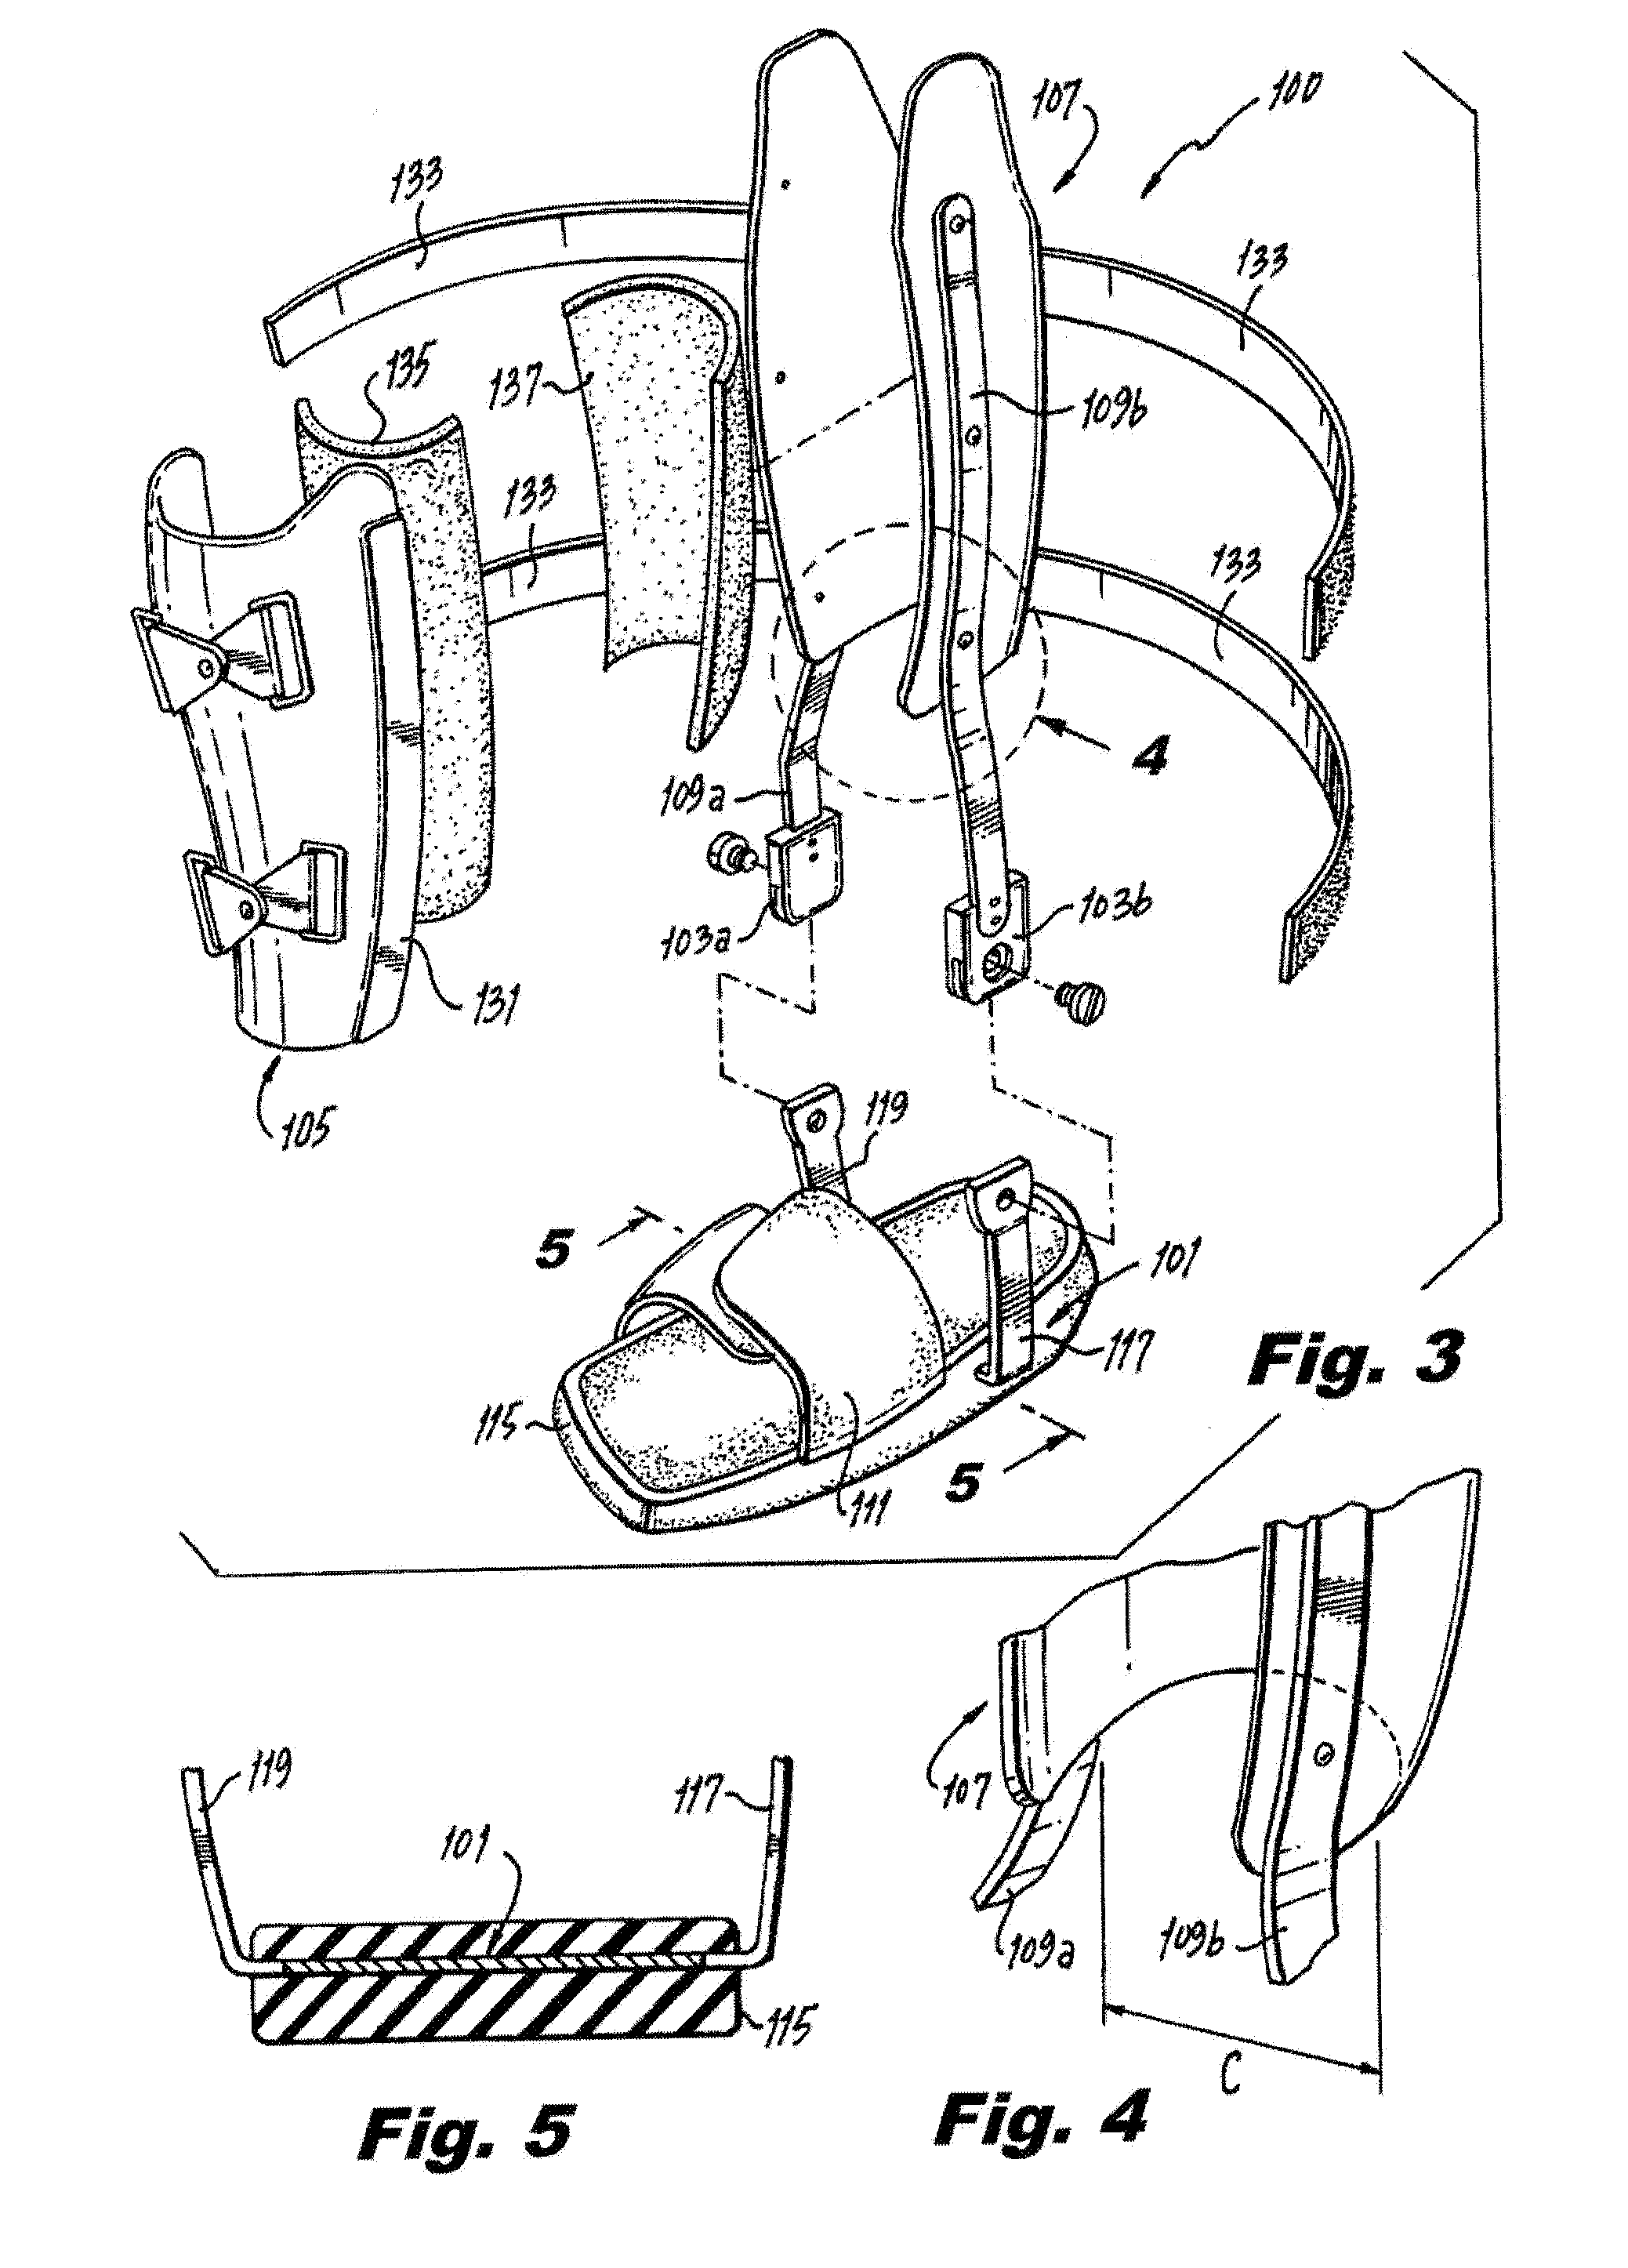 Orthotic Assembly for Selectively off-Loading a Weight-Bearing Joint